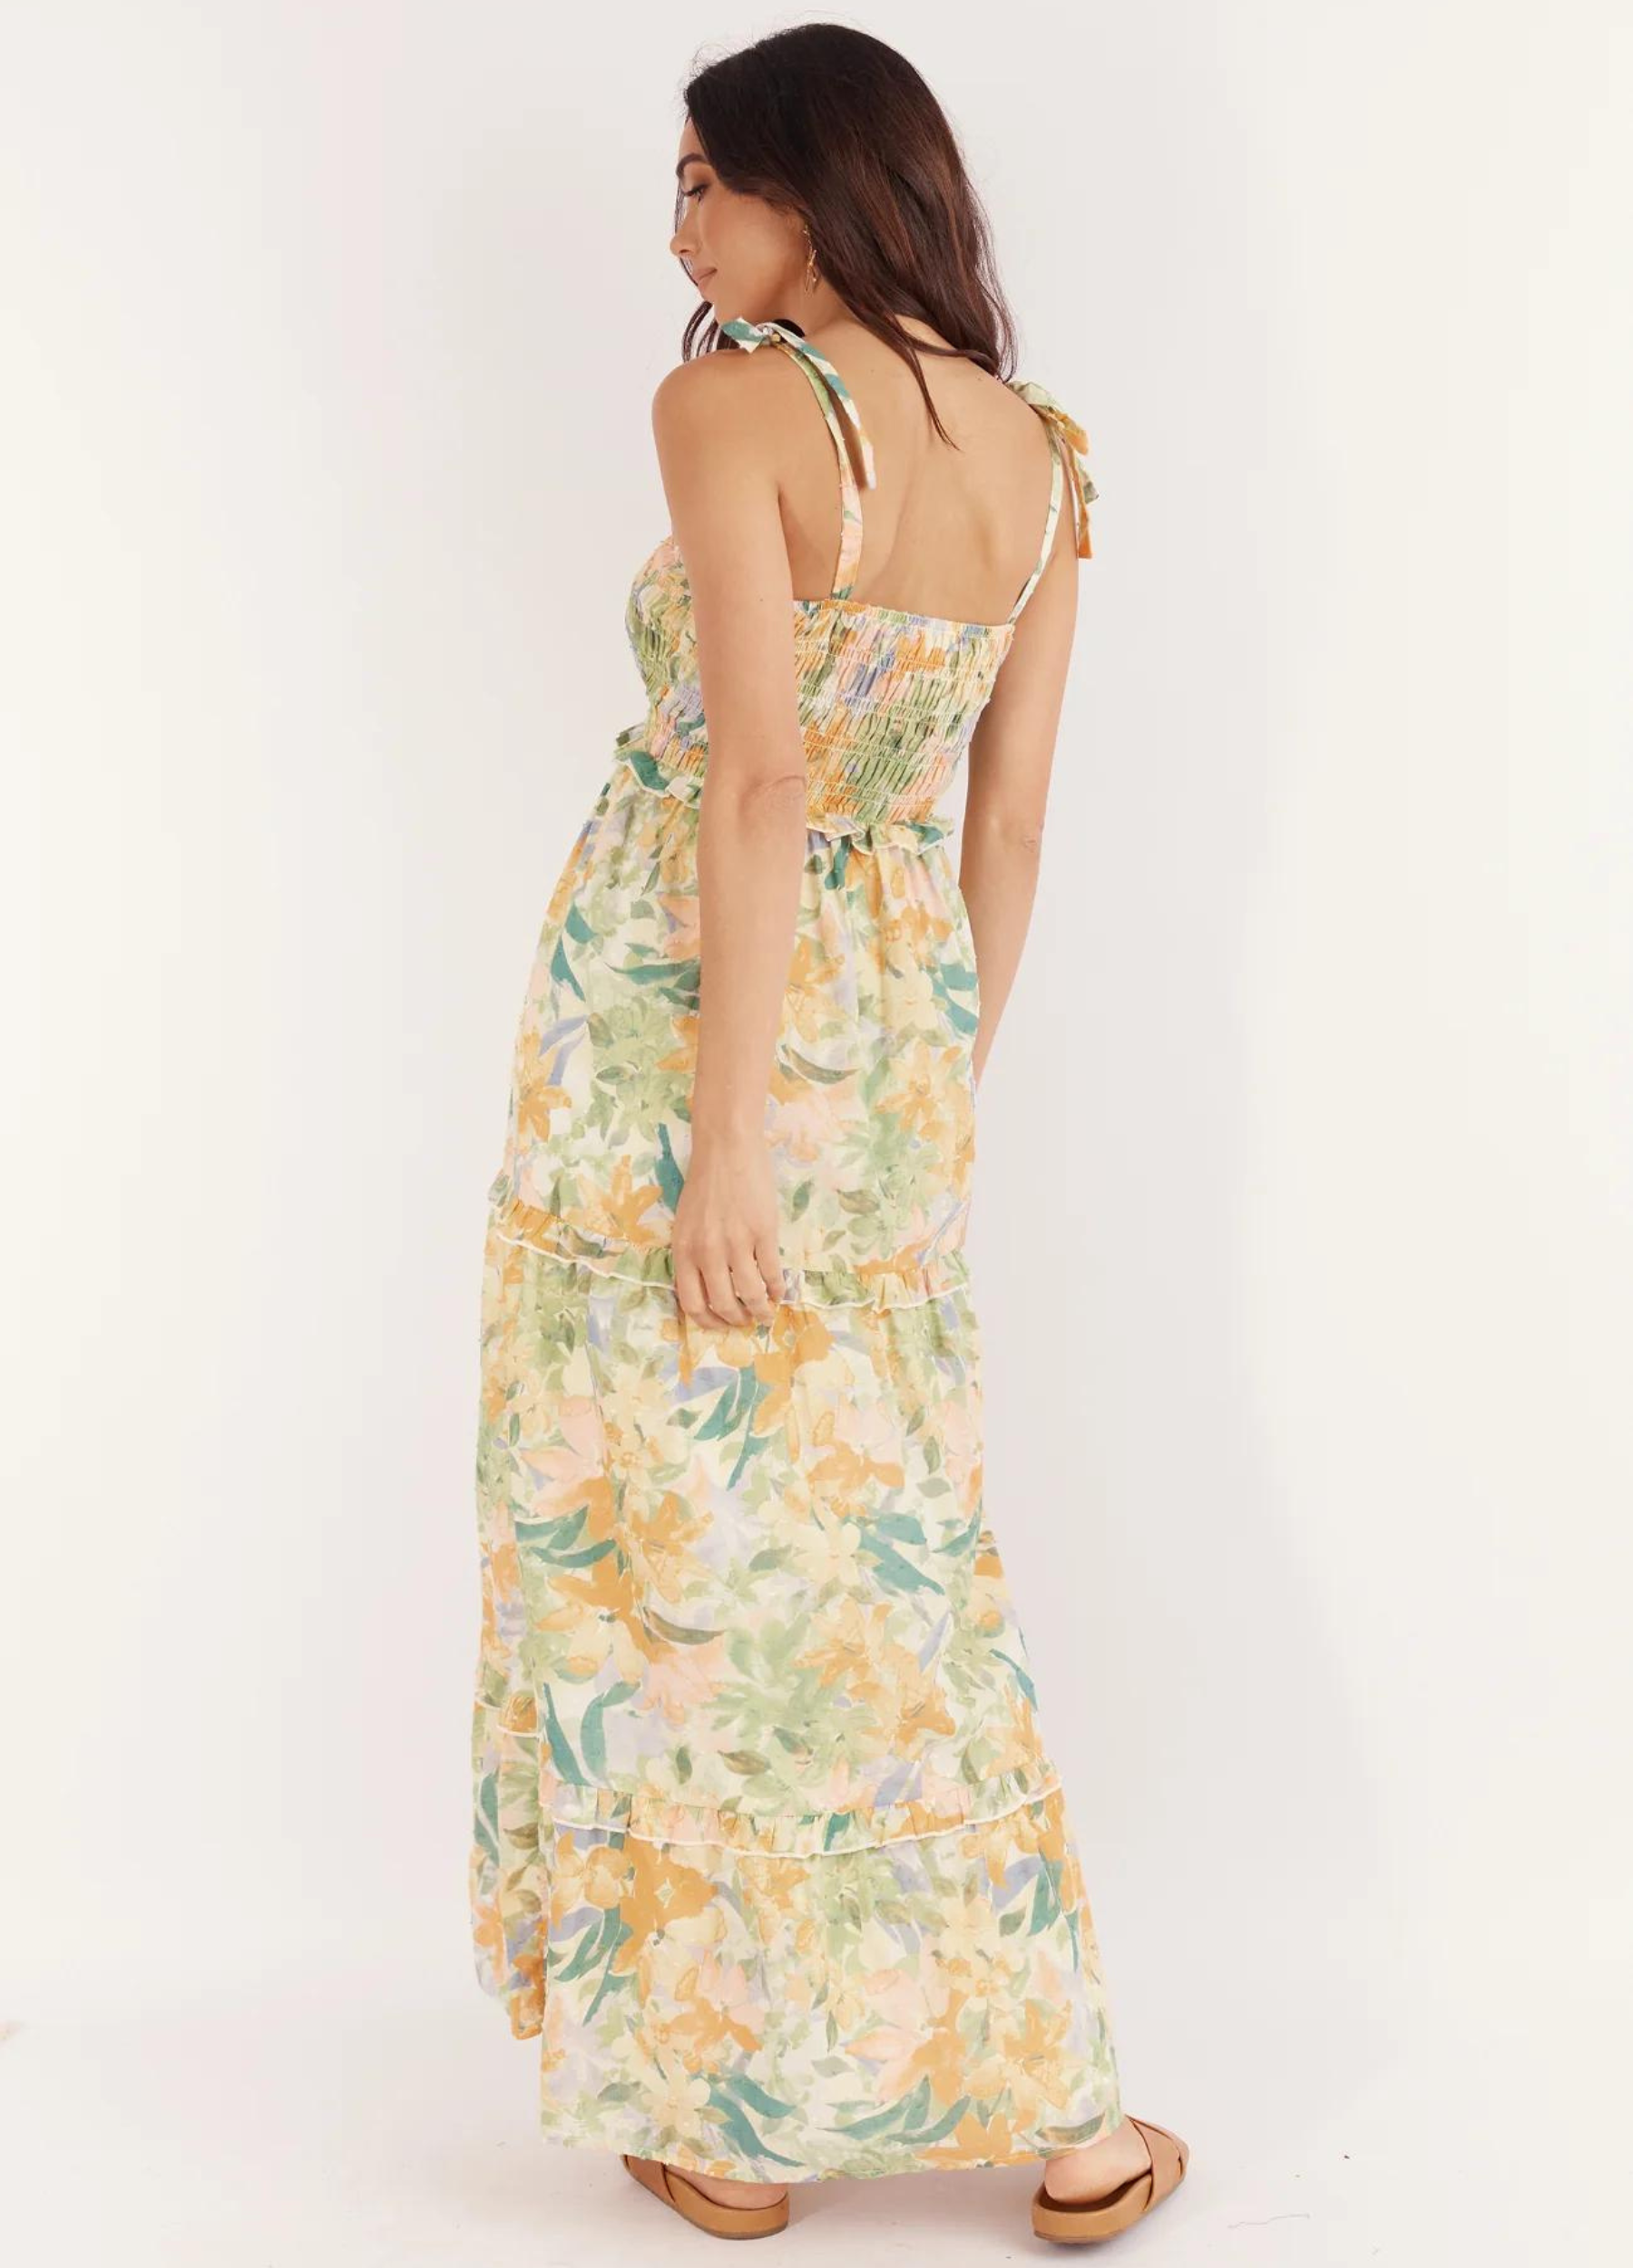 Model wearing the Yelena floral print dress with tie shoulders